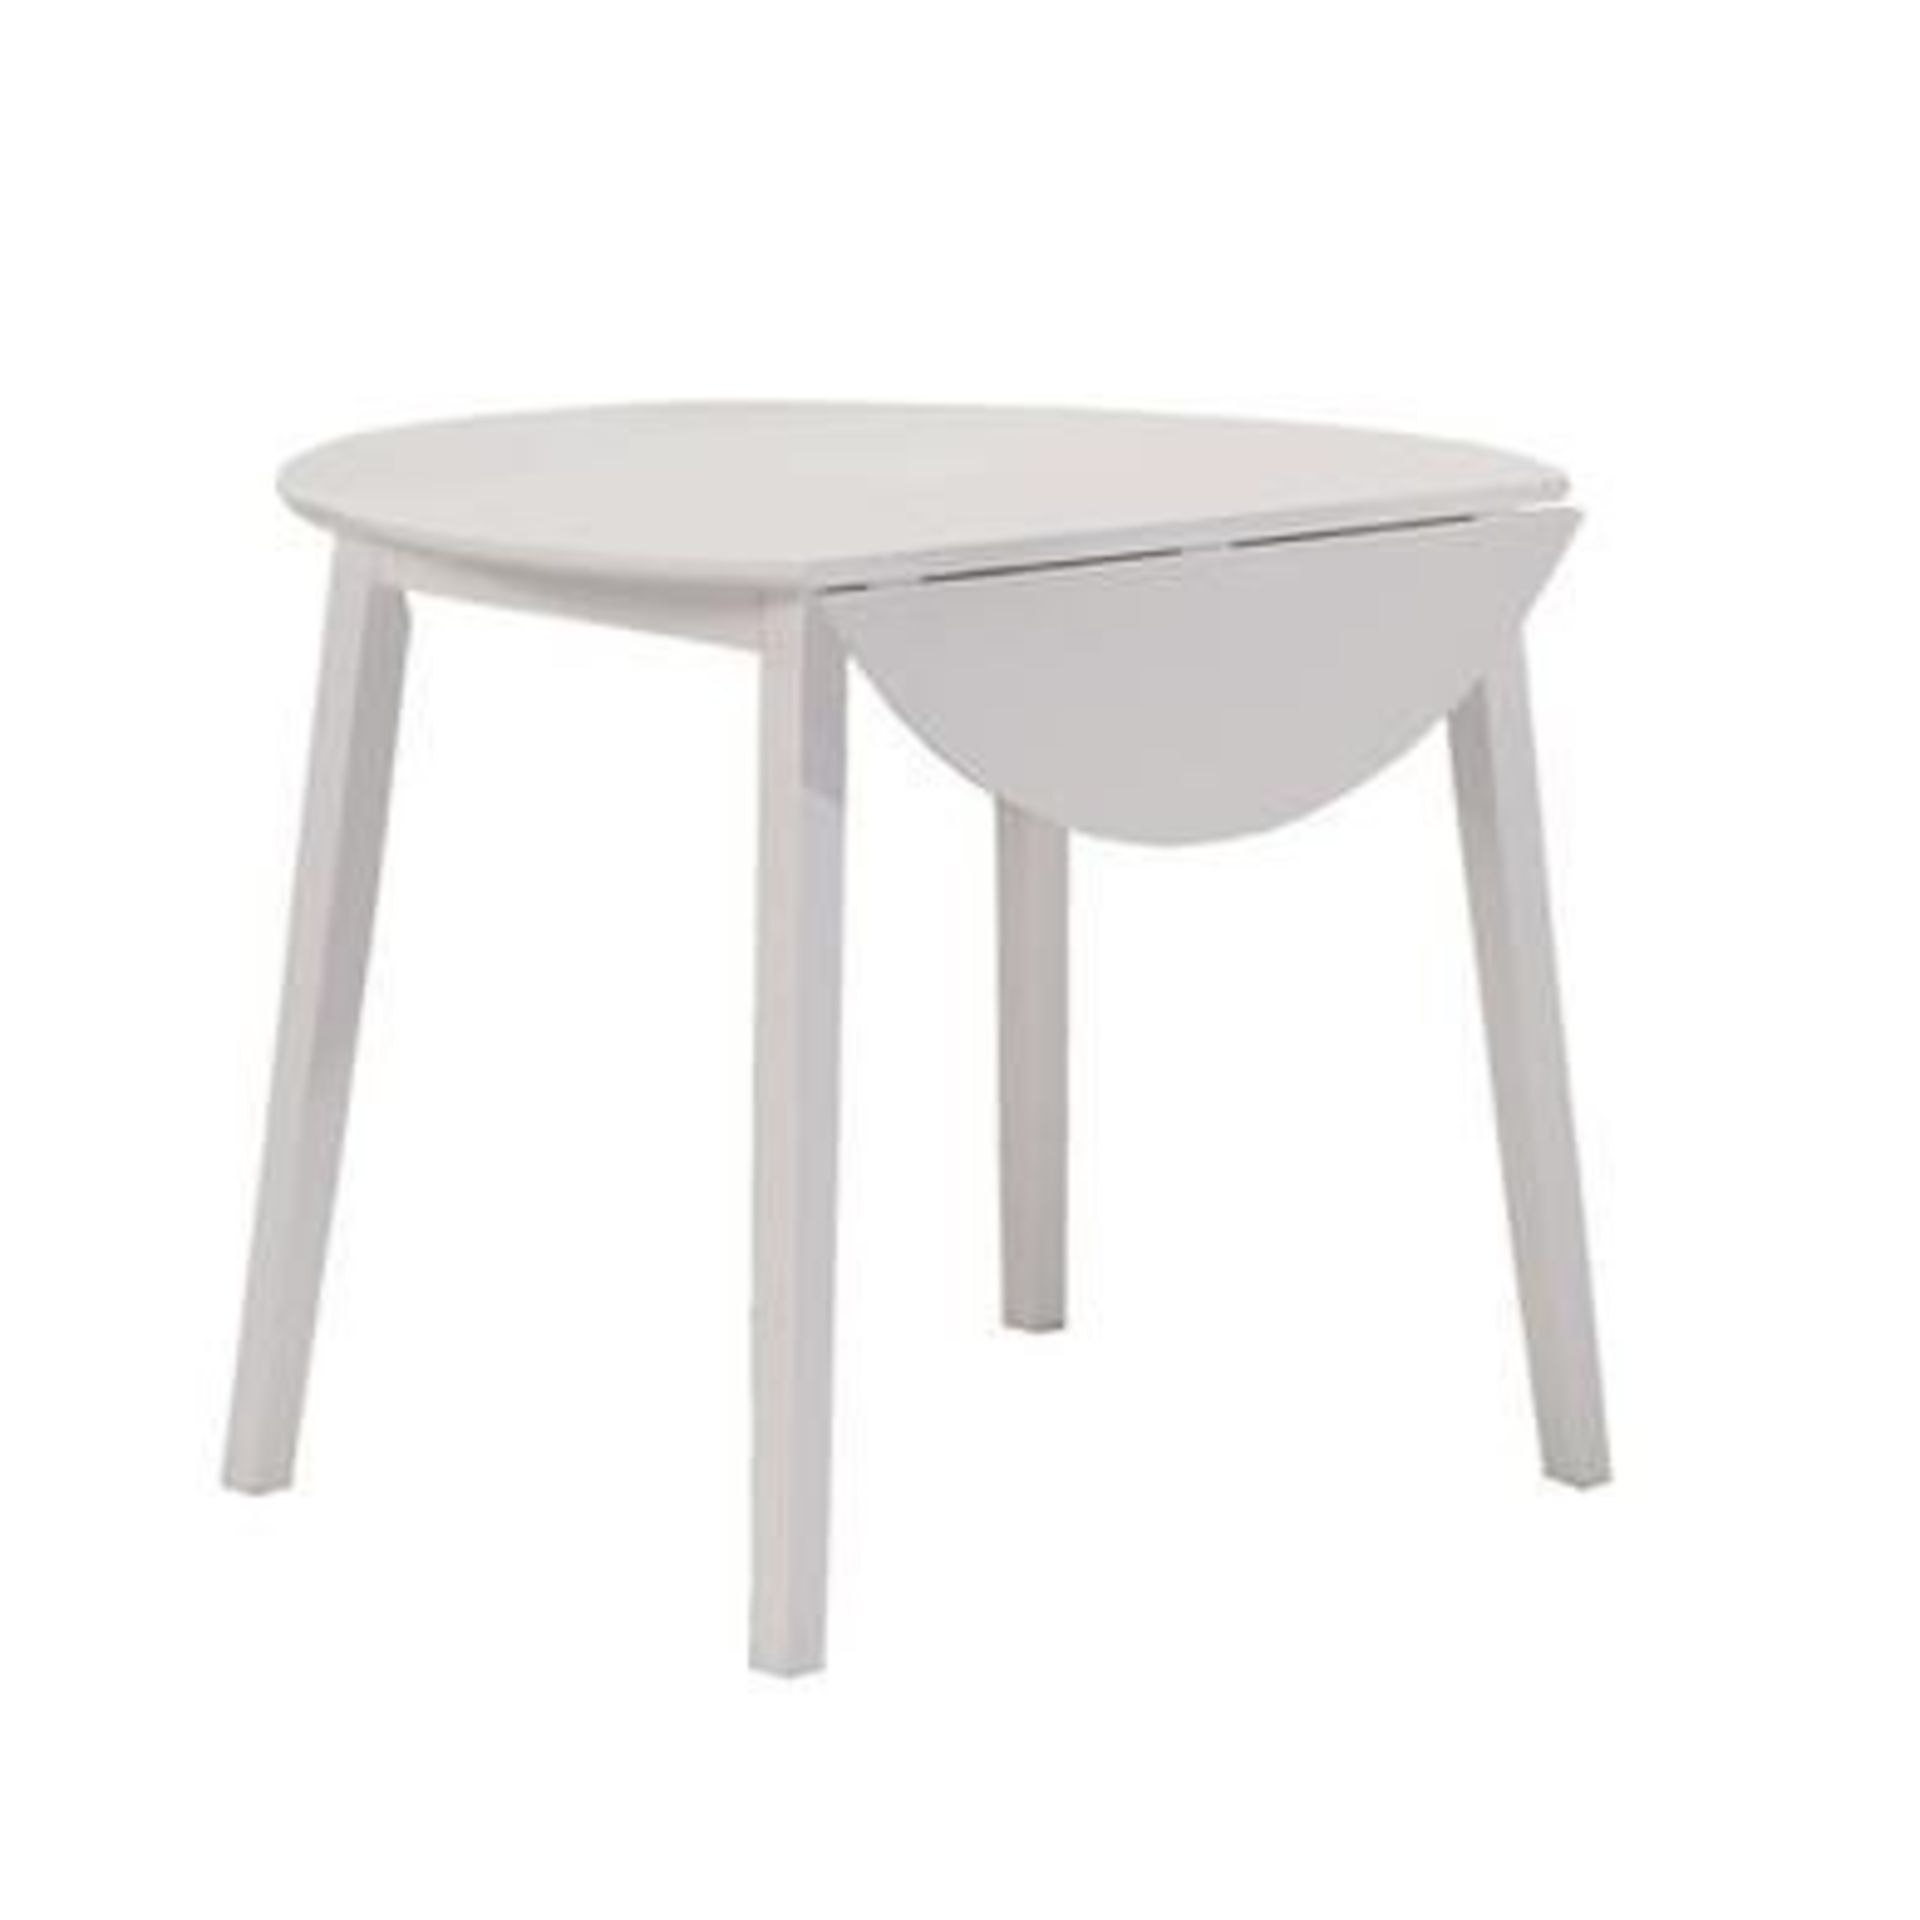 1 BOXED NEW HAVEN ROUND DROP LEAF TABLE IN STONE WHITE - NHA022 / RRP £90.00 (VIEWING HIGHLY